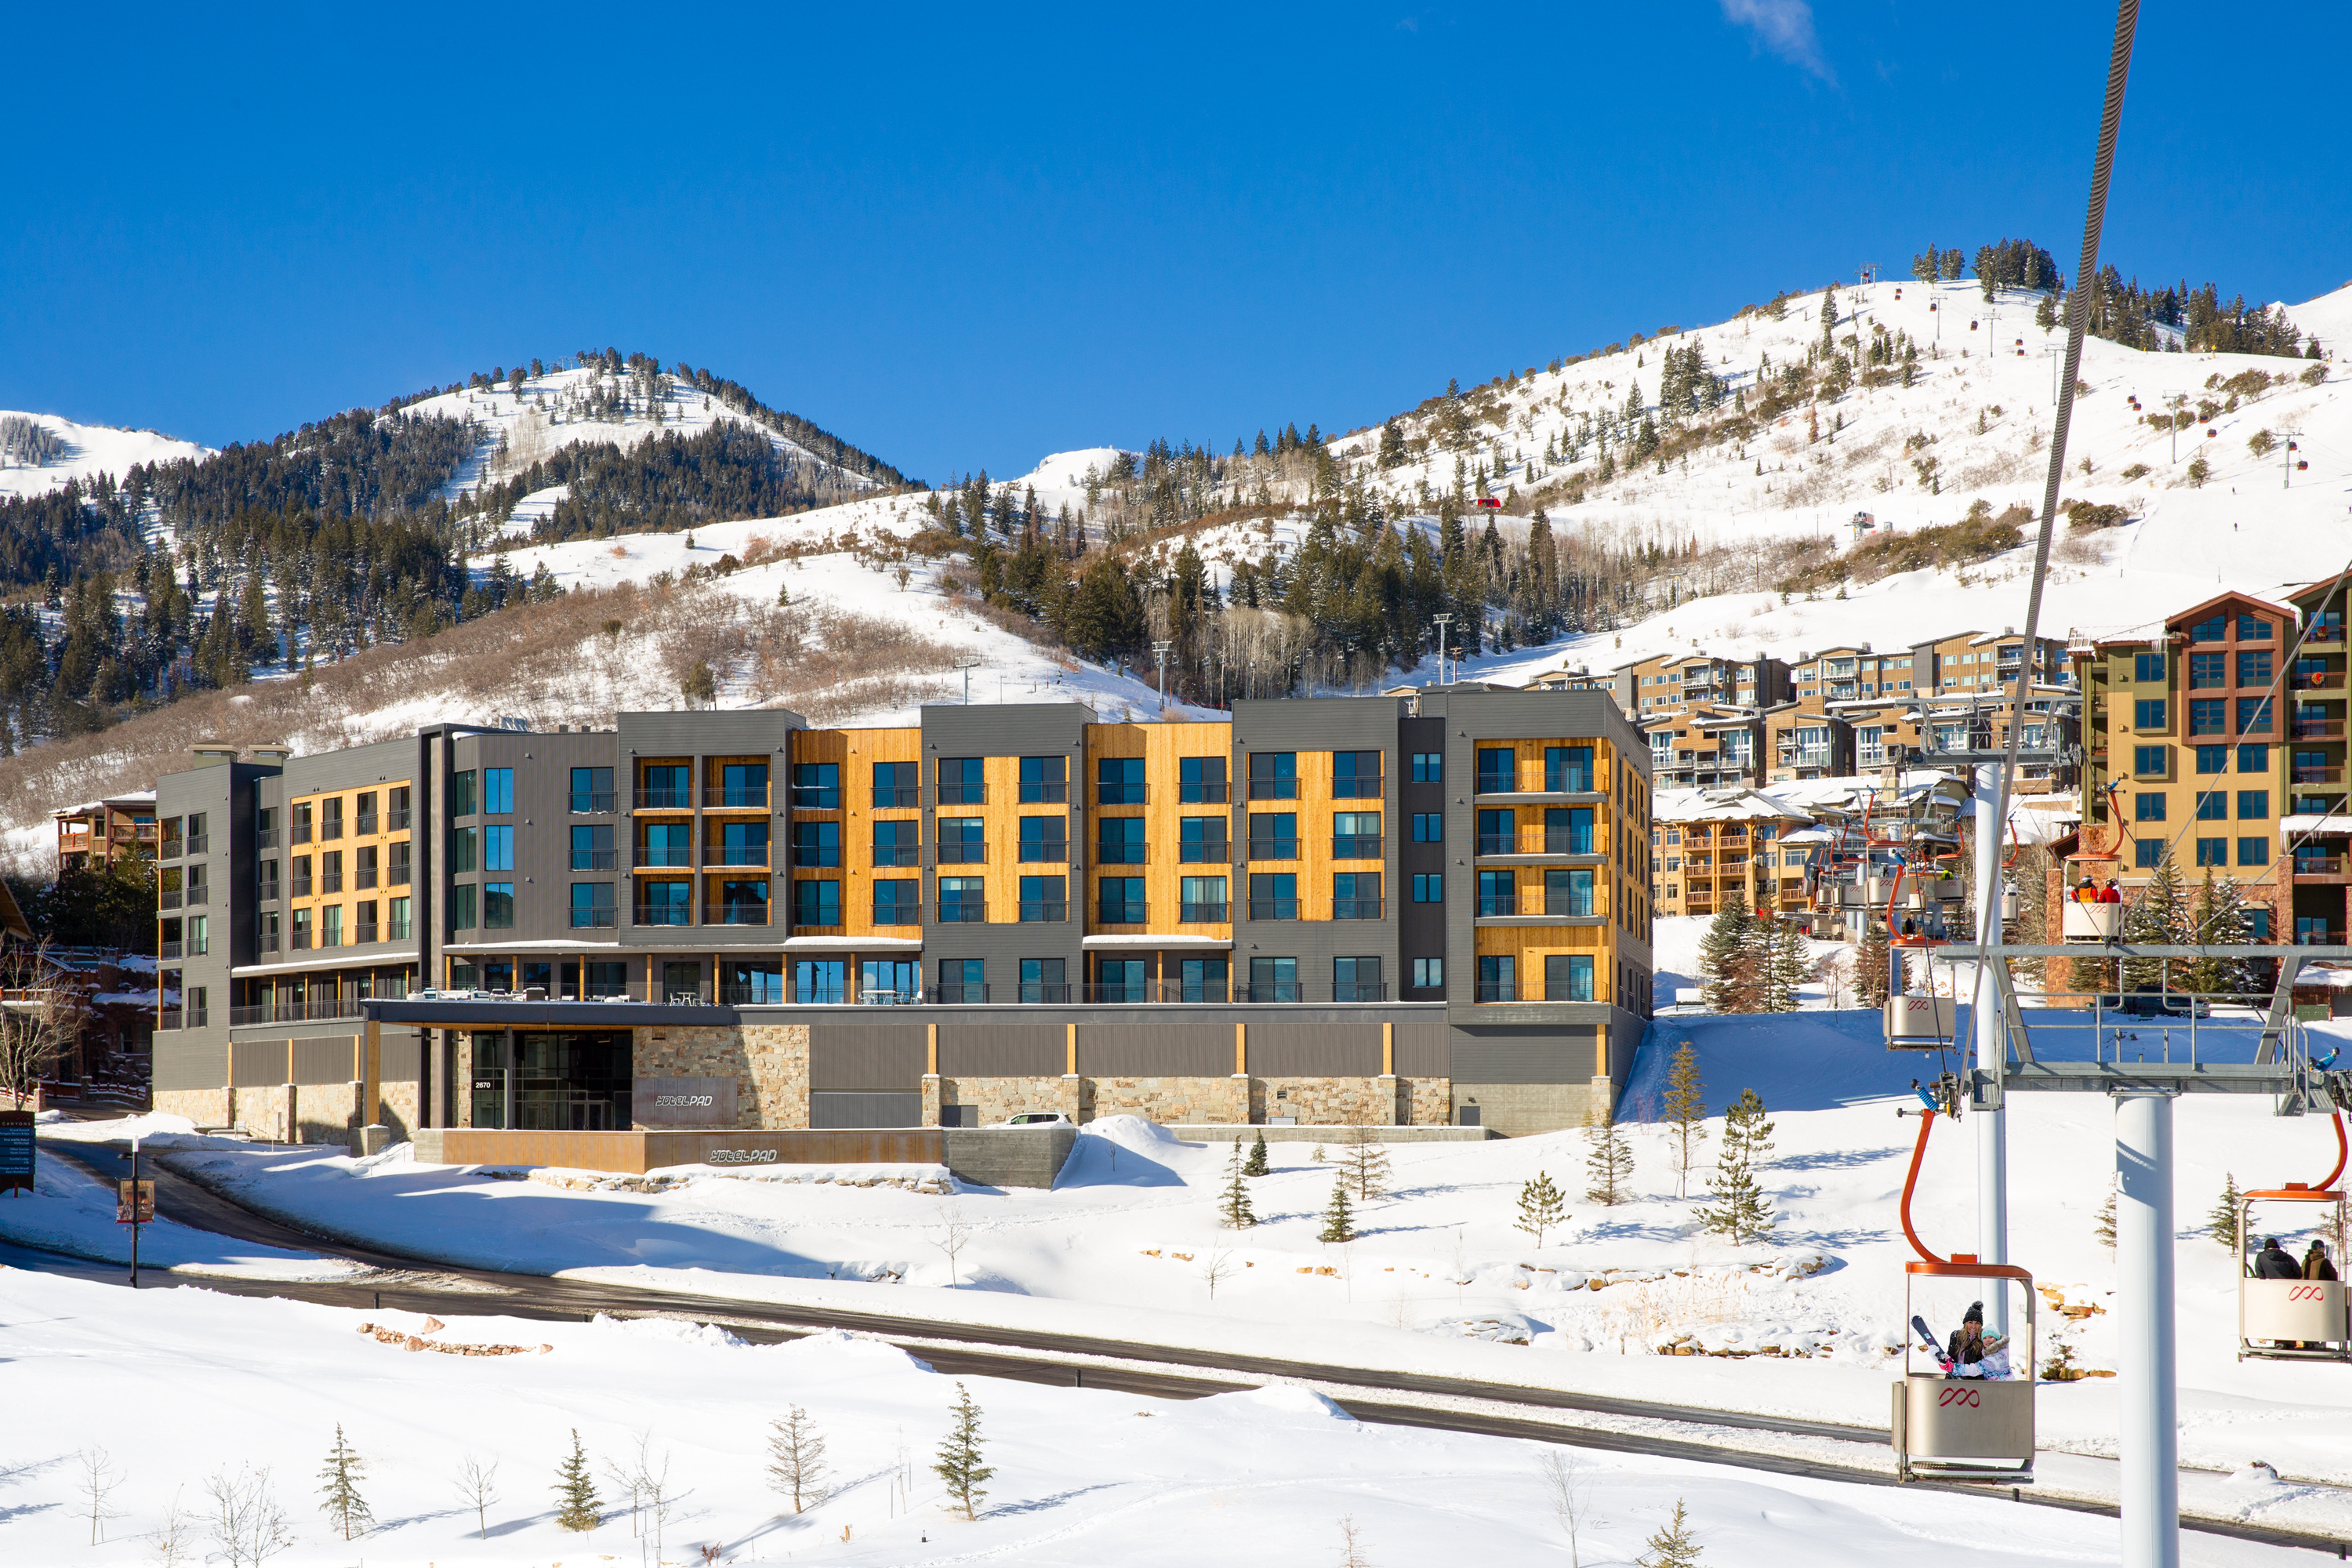 Ski Vacation Package - Save 20% during the 